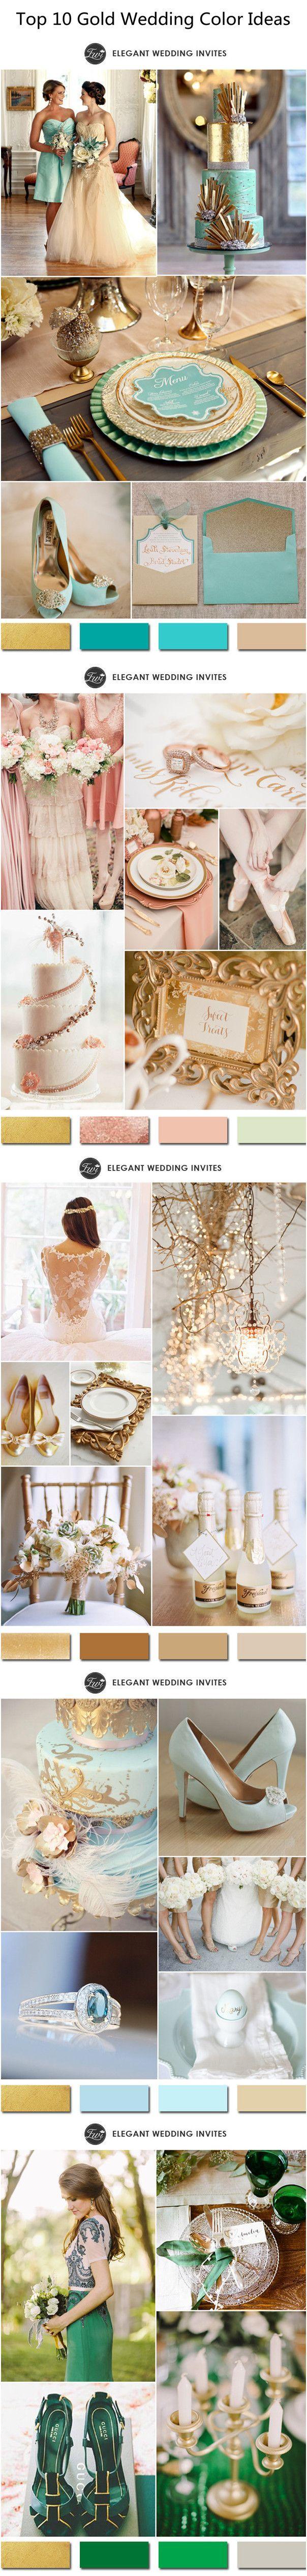 Свадьба - 10 Hottest Gold Wedding Color Ideas-2016 Wedding Trends Part Two